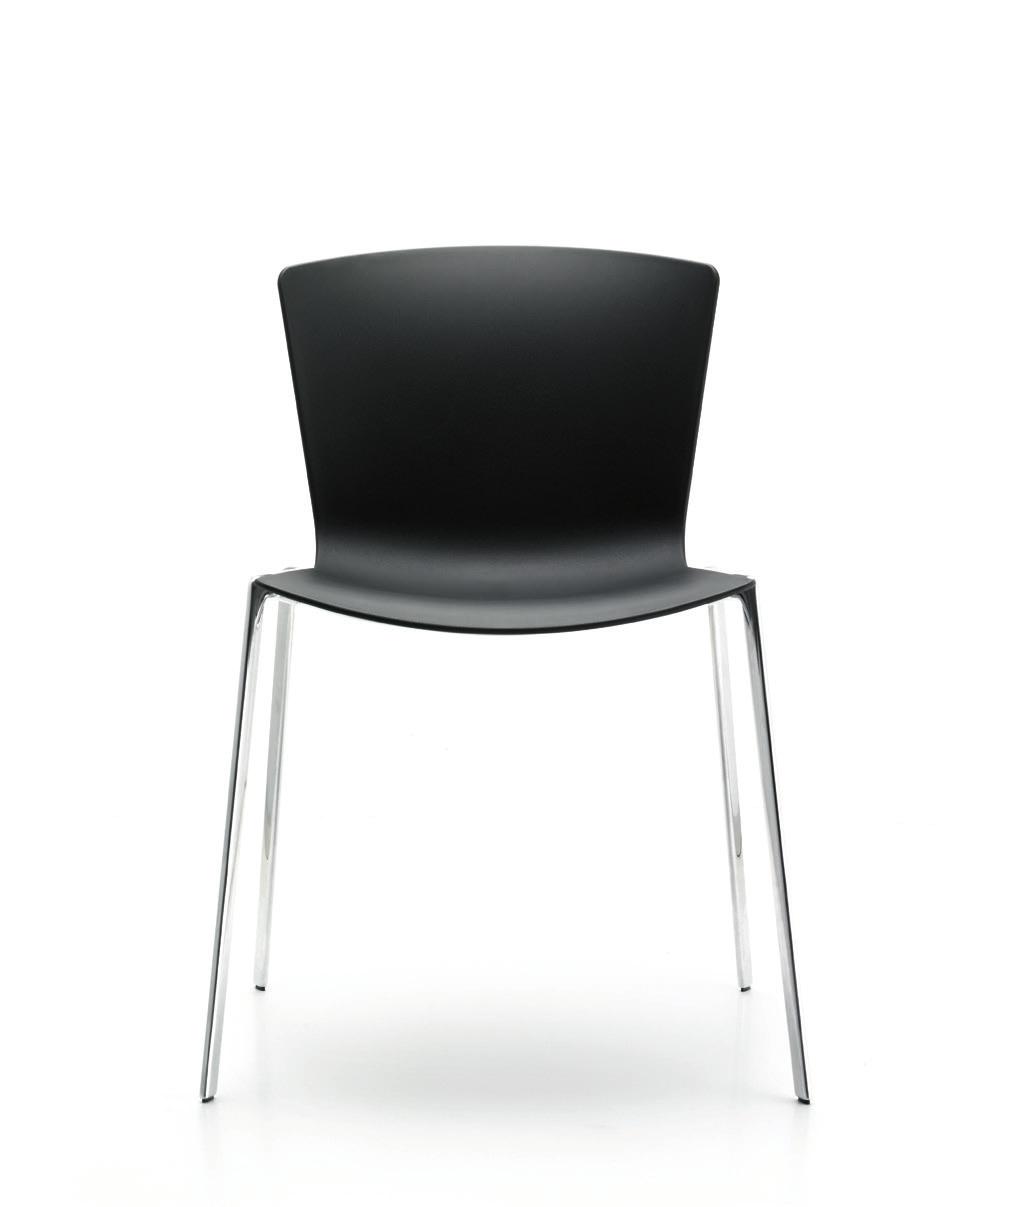 Poly All Models design: Liévore Altherr Molina, White Polypropylene (W) Grey Polypropylene (G) Black Polypropylene (B) Red Polypropylene (R) Spec Guides View Side Chair, Sled and 4 Leg Base Chair